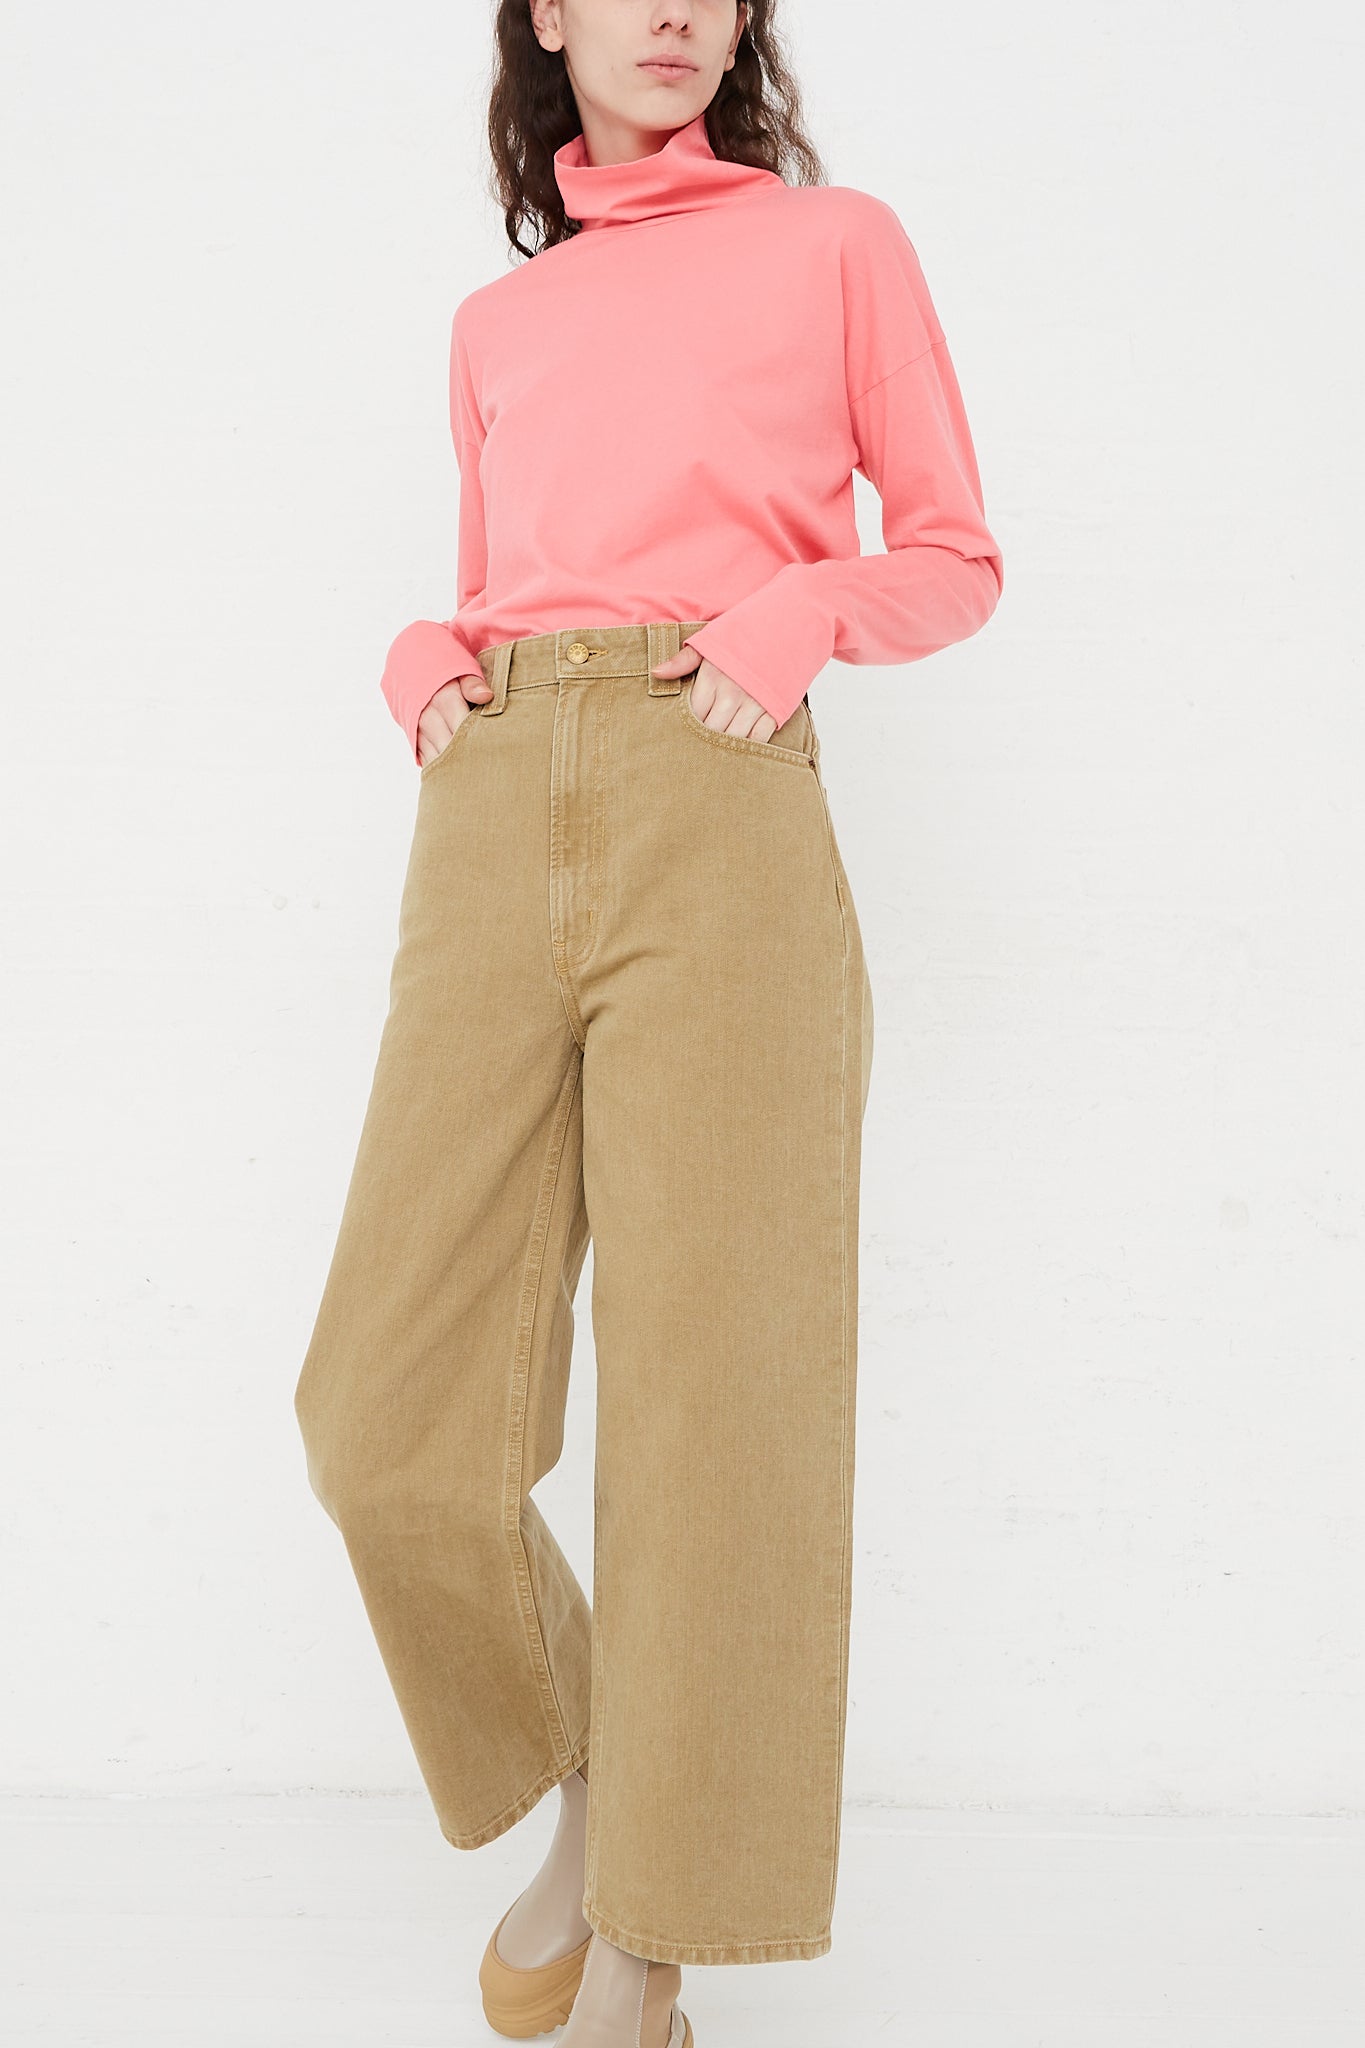 The model is wearing a pink turtle neck and tan wide leg pants by the B Sides brand.